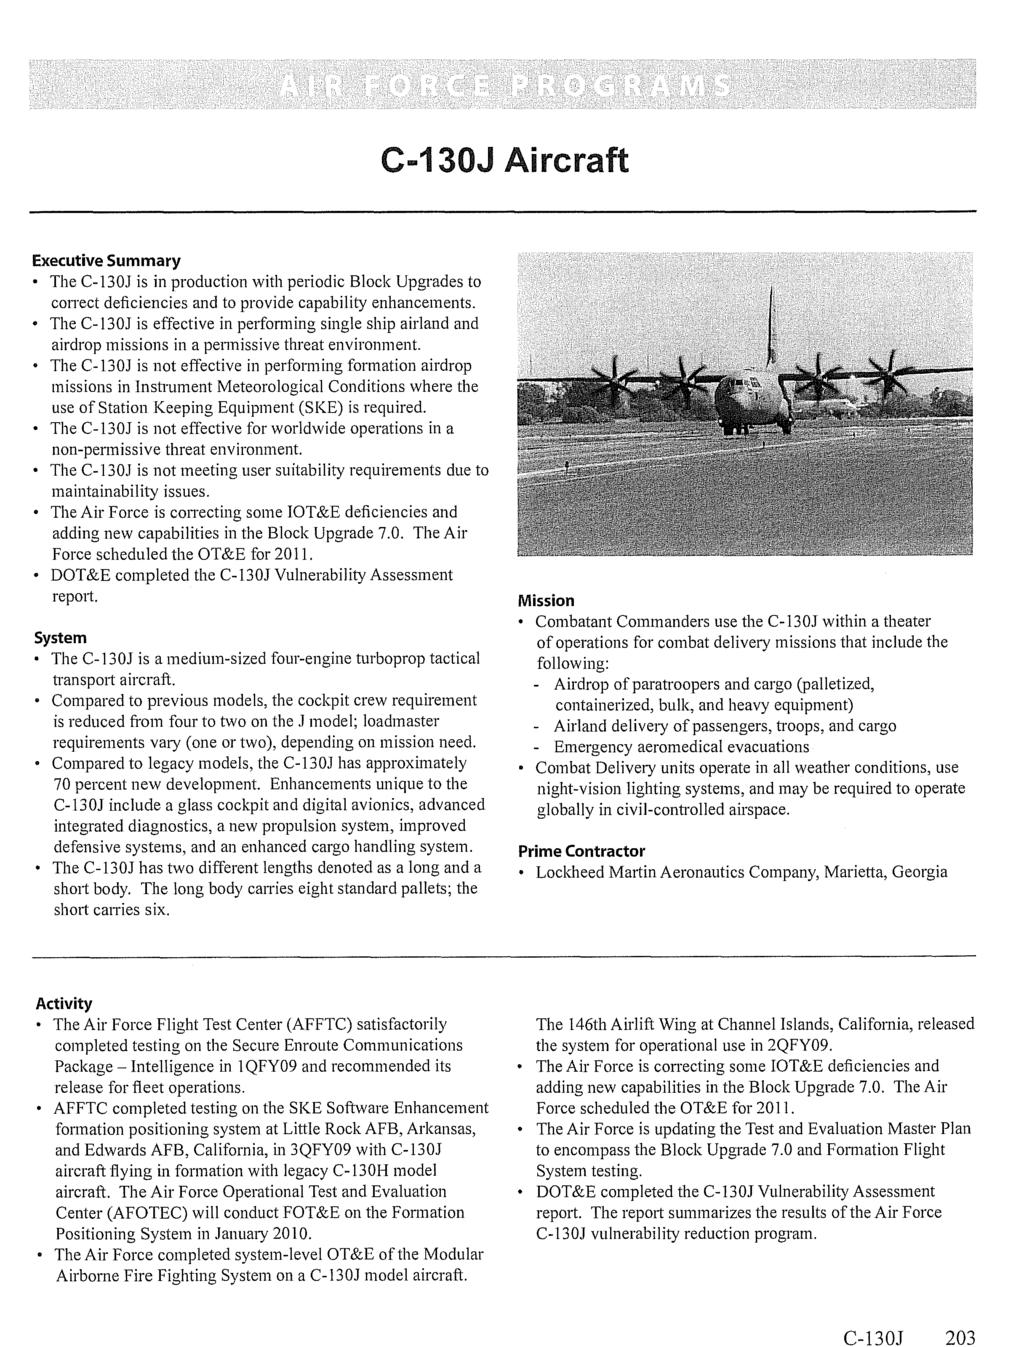 C-130J 203 C-130J Aircraft Executive Summary The C-130J is in production with periodic Block Upgrades to correct deficiencies and to provide capability enhancements.